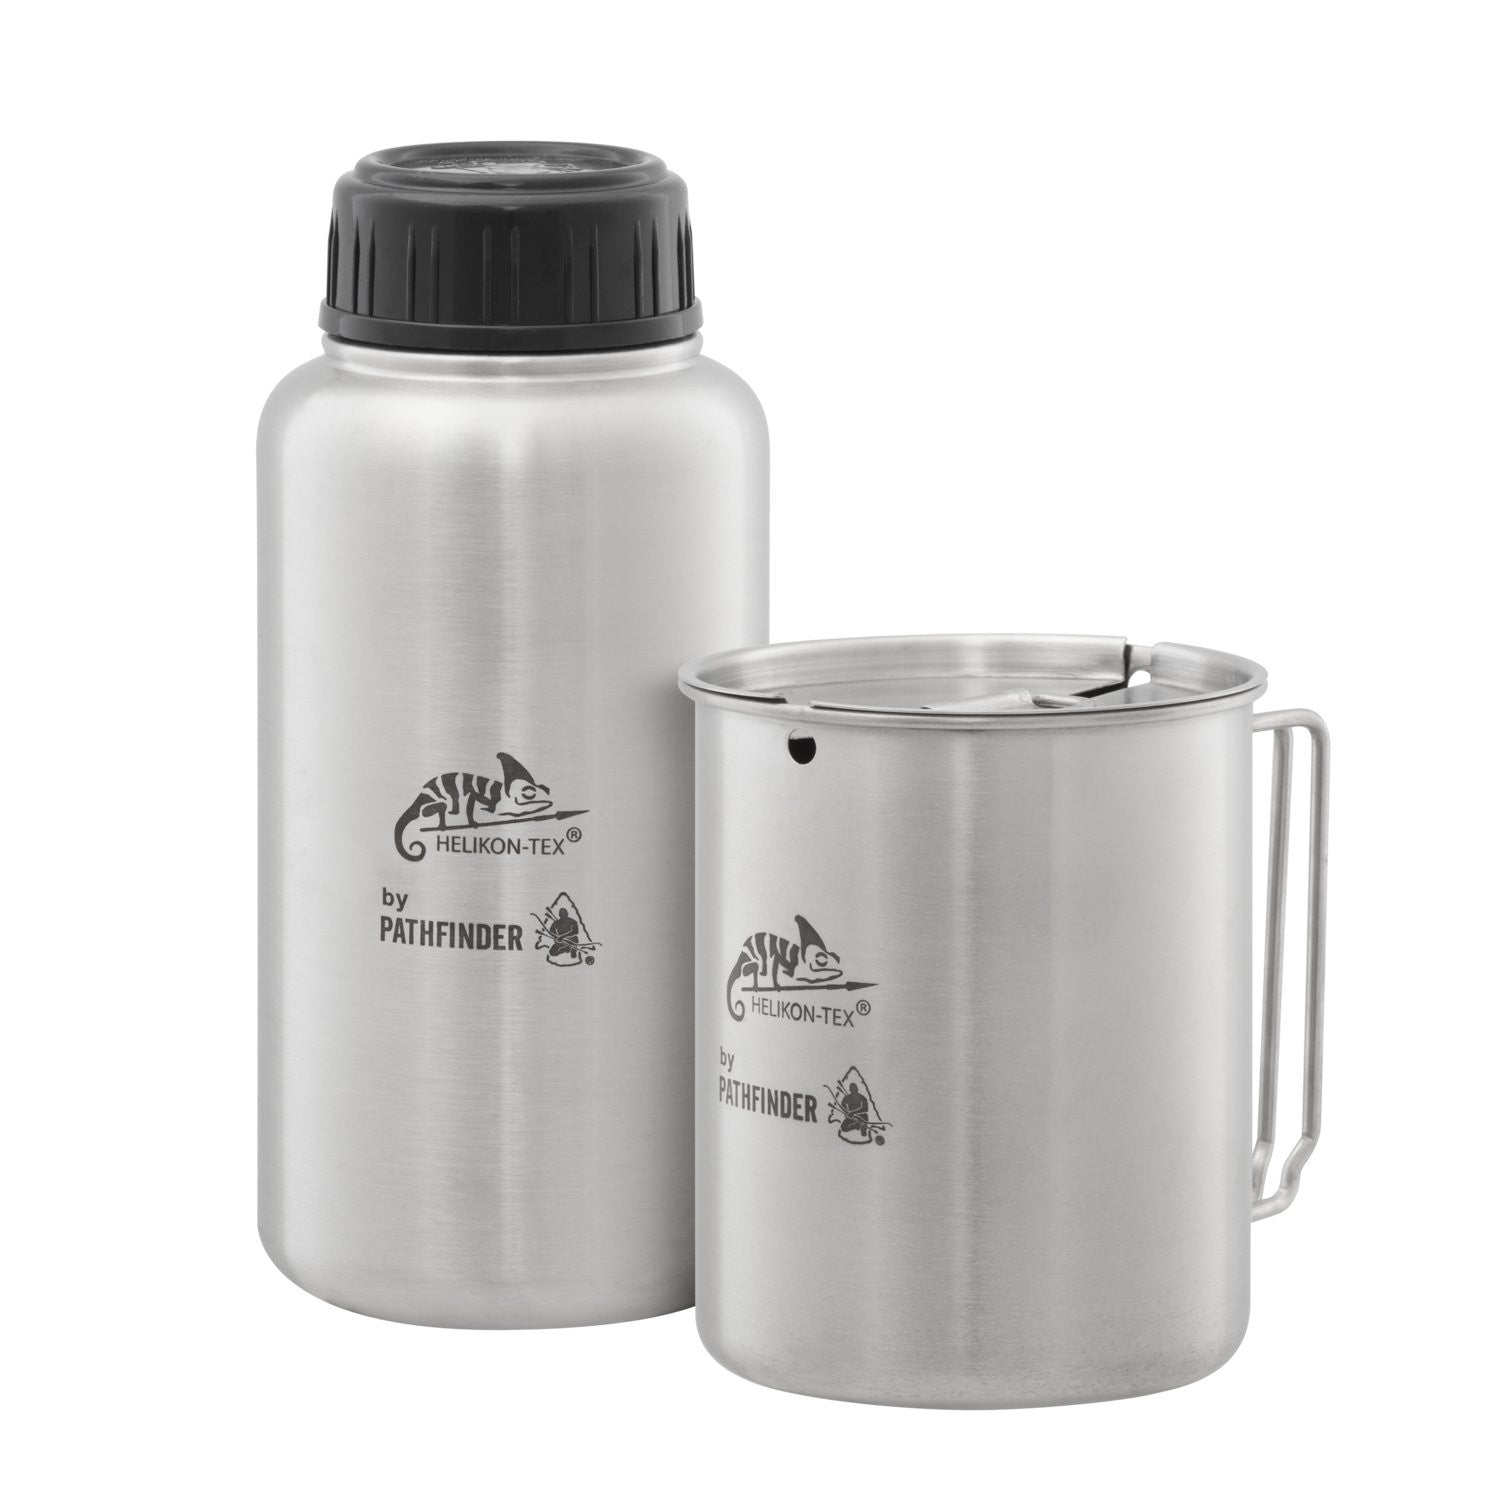 PATHFINDER 32 oz. STELL WATER BOTTLE WITH NESTING CUP SET